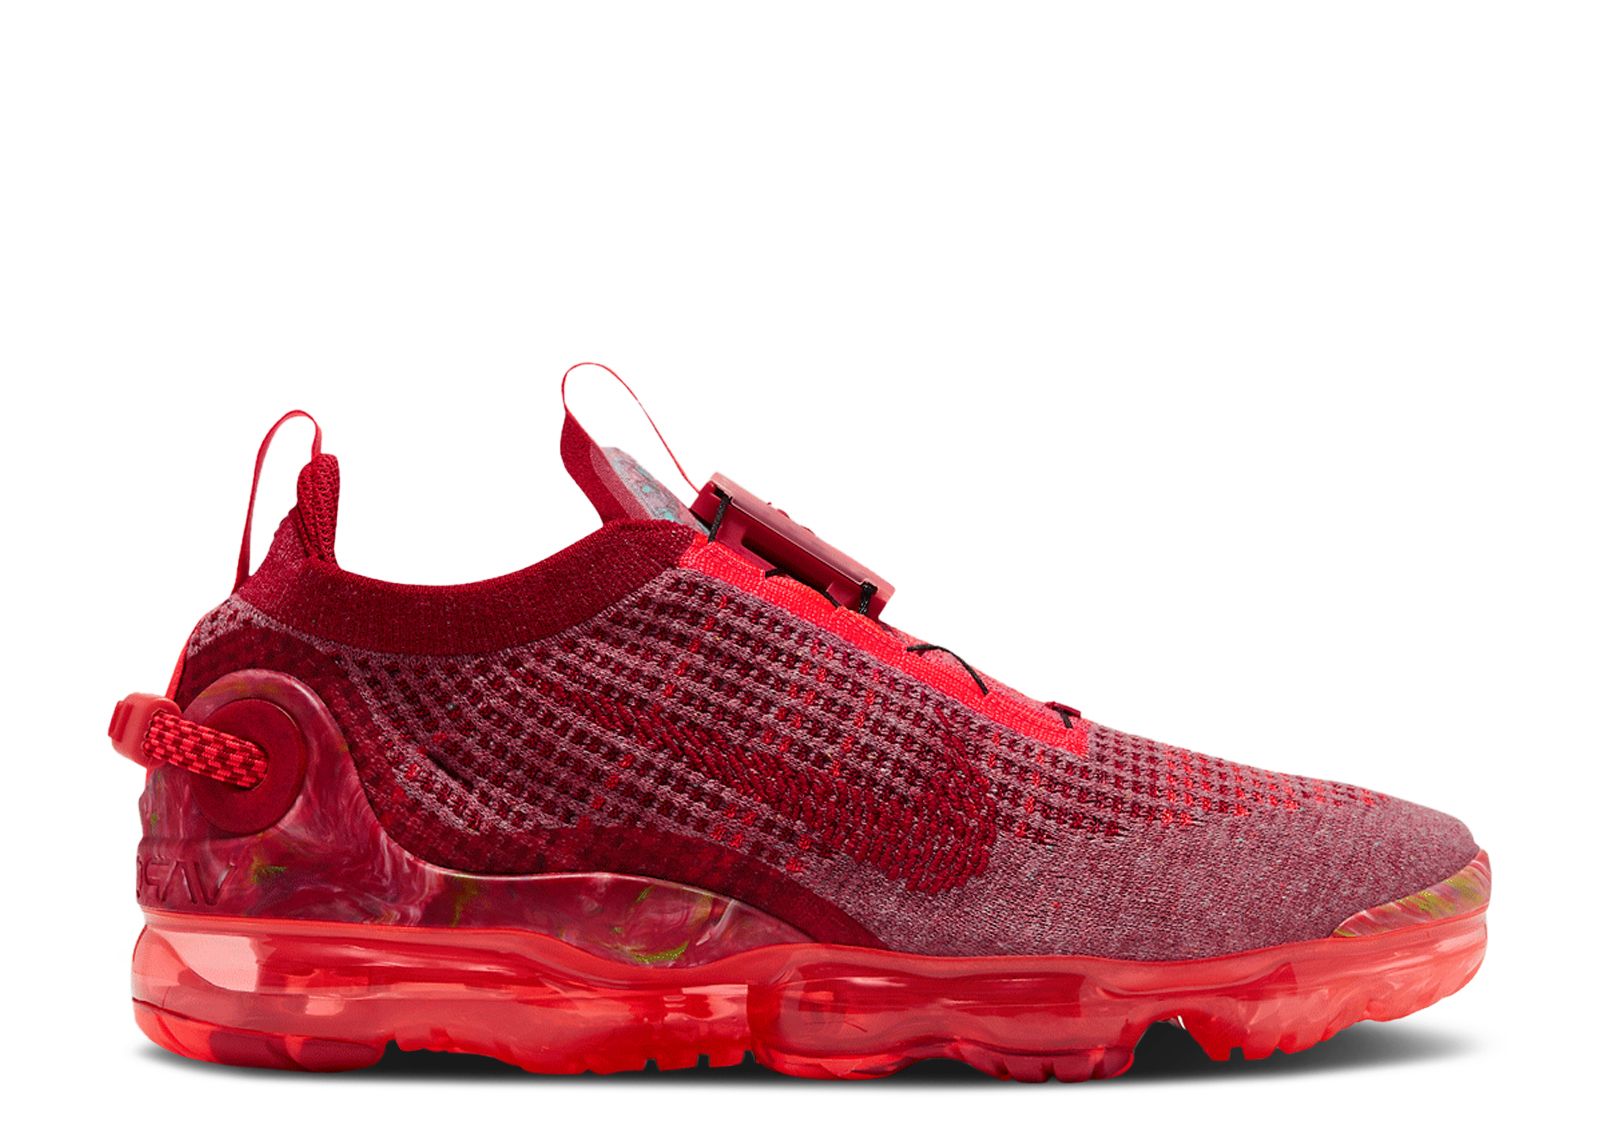 vapormax in red